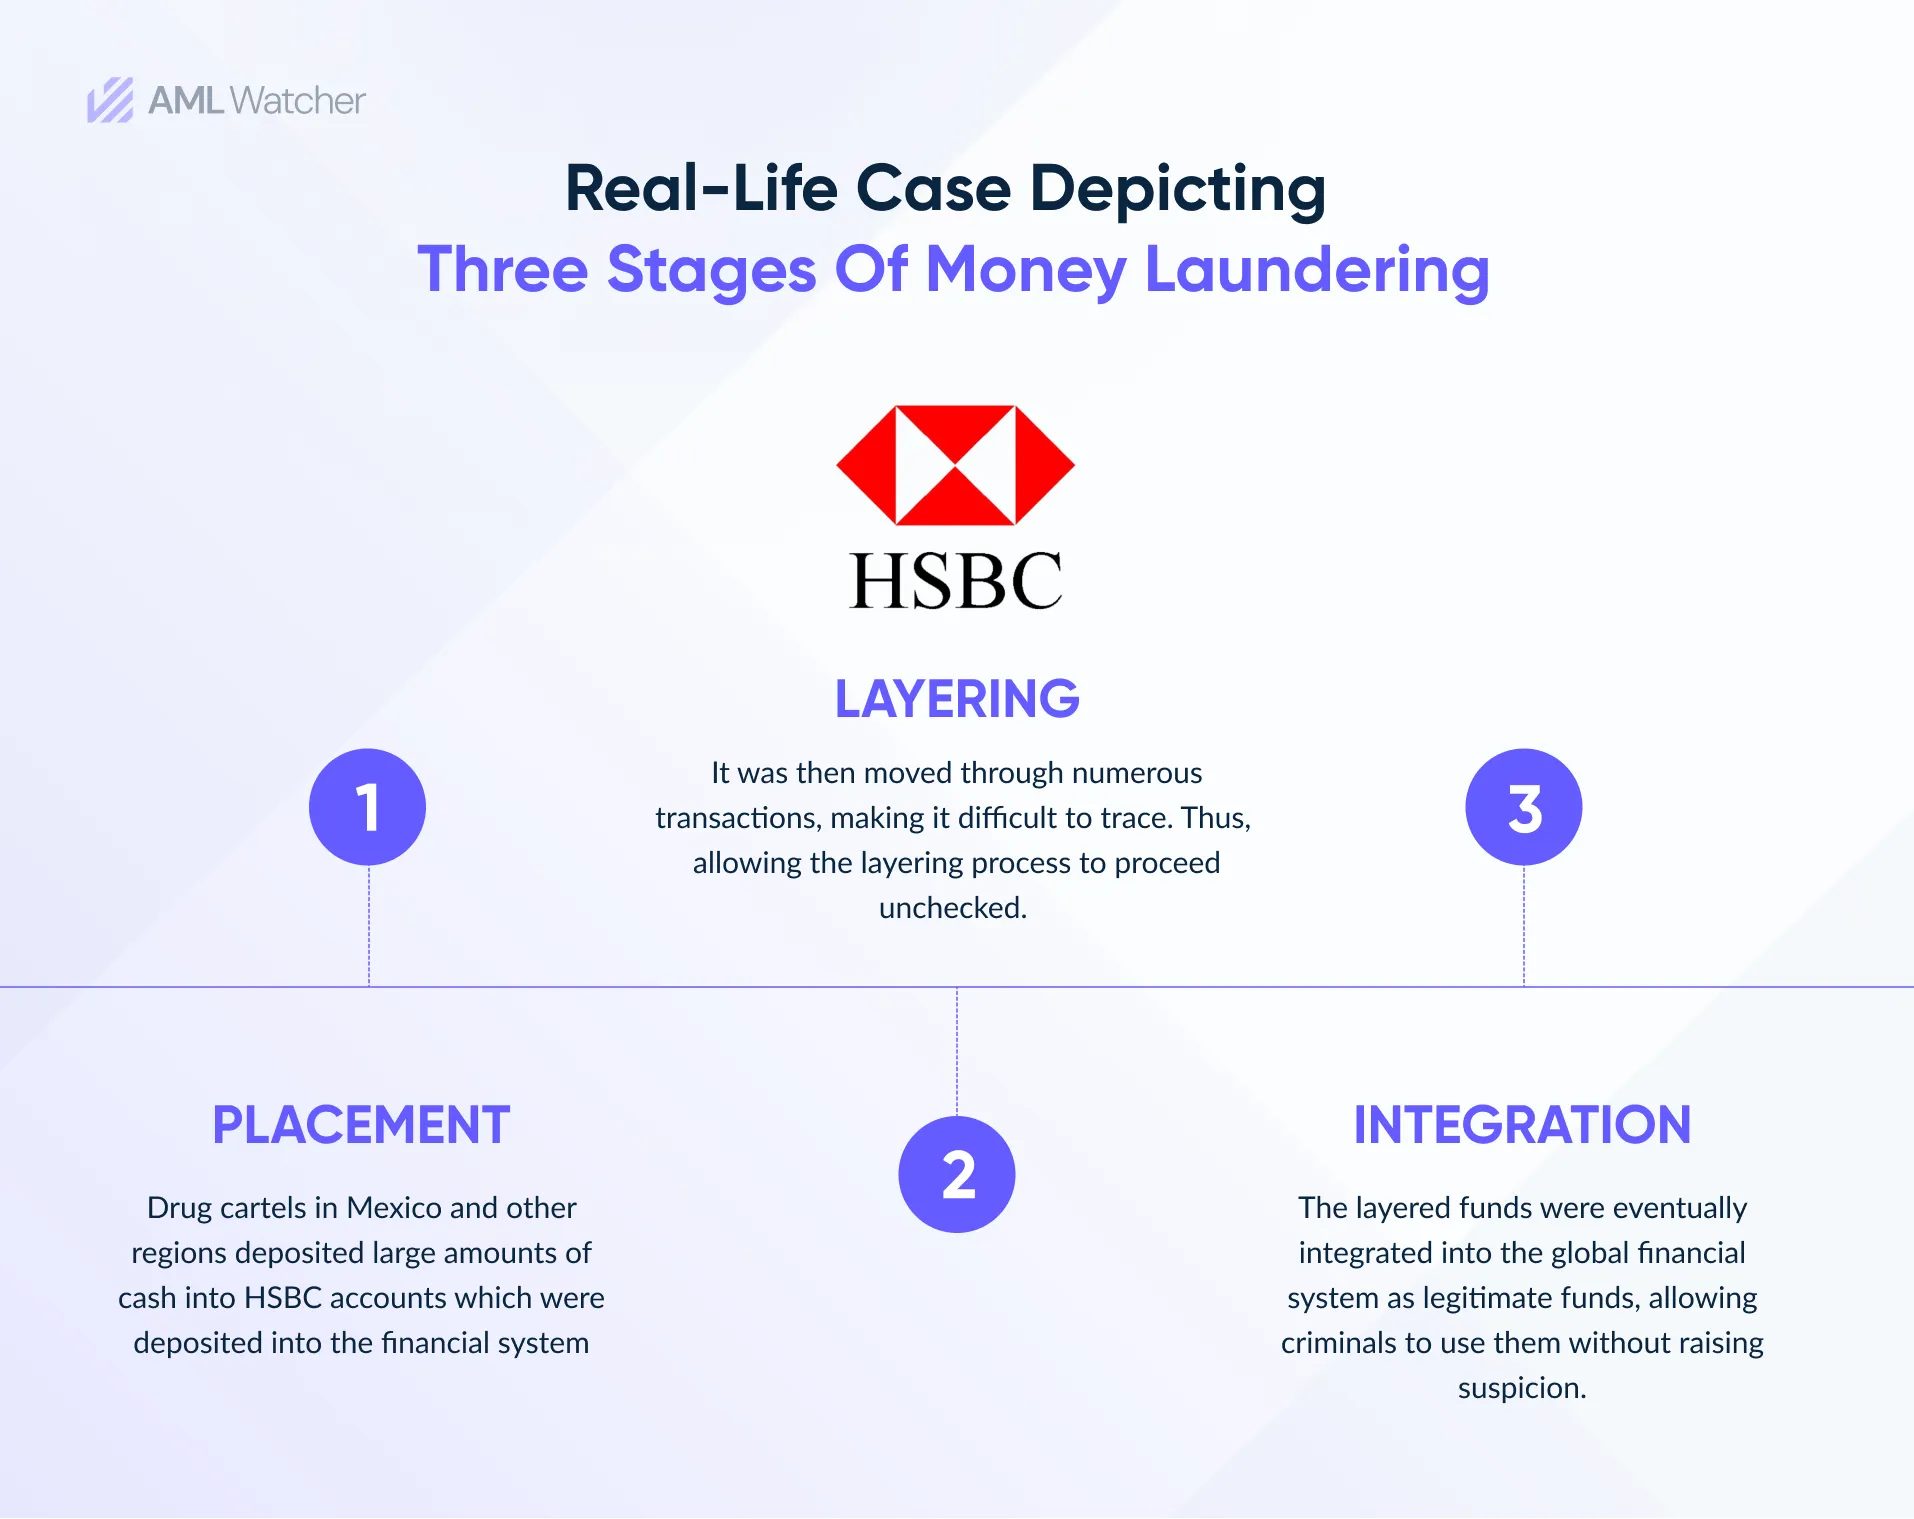 This image illustrates a real-life example of each stage of money laundering